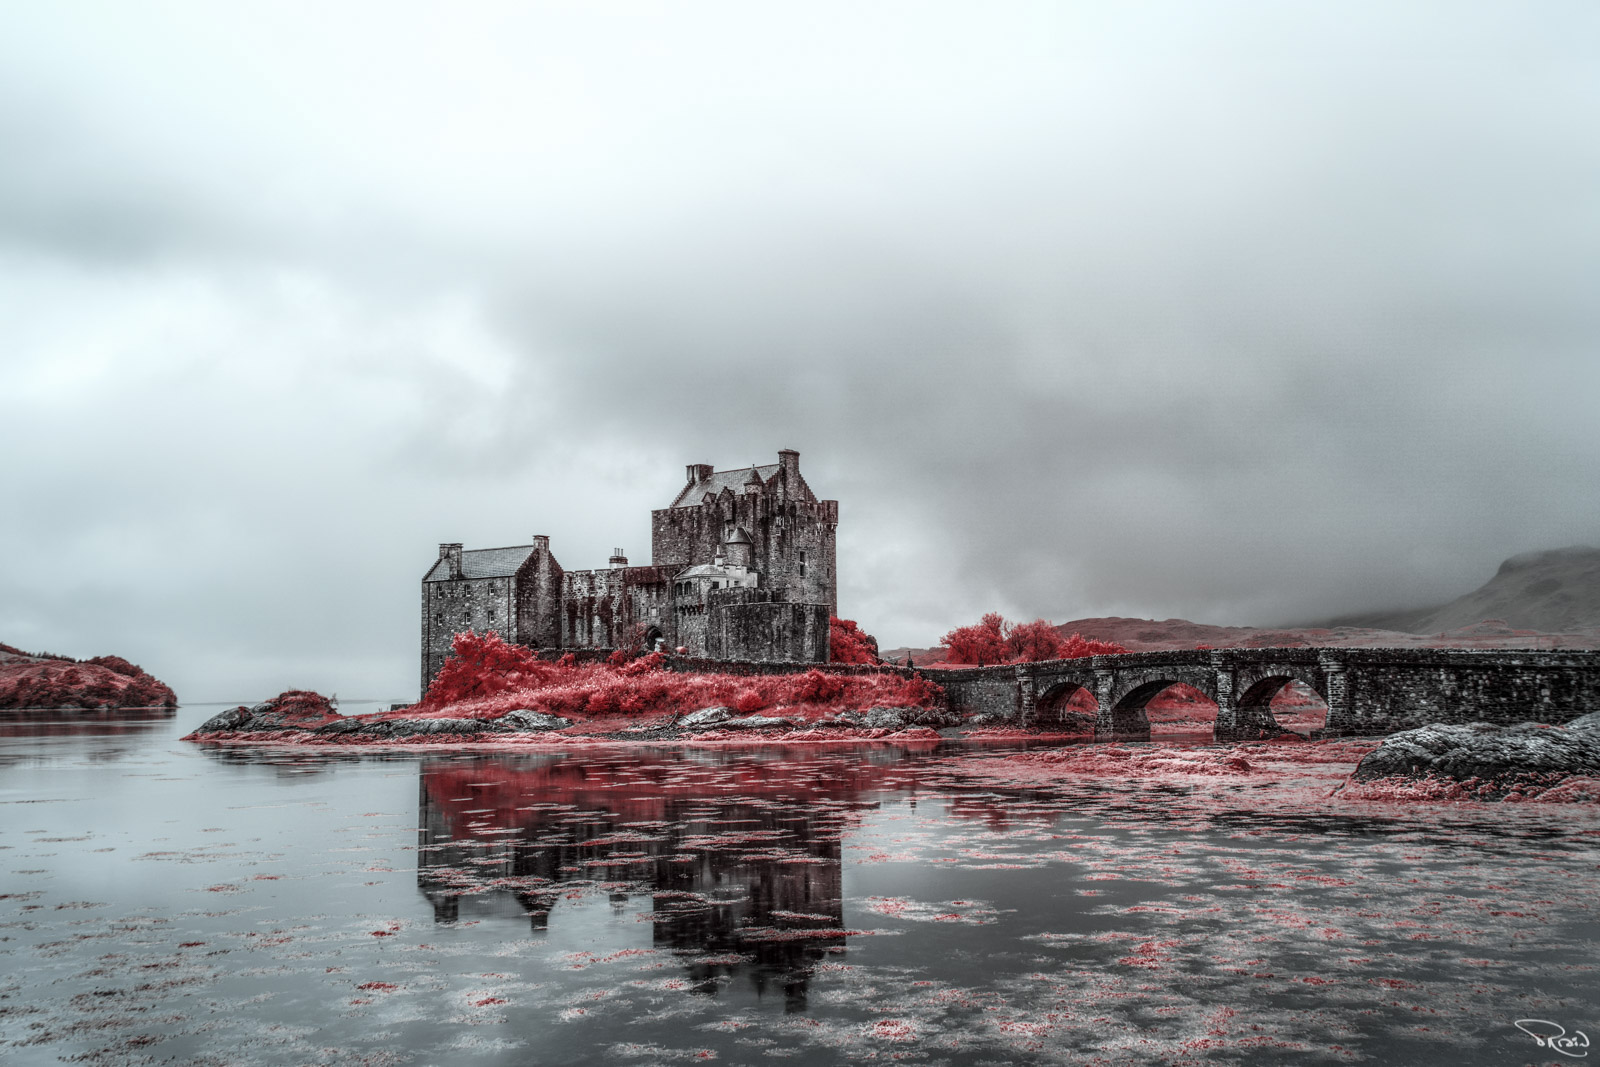 A false-color infrared image of Eilean Donan Castle on a moody, foggy day shows unusual red foliage reflected in the loch.